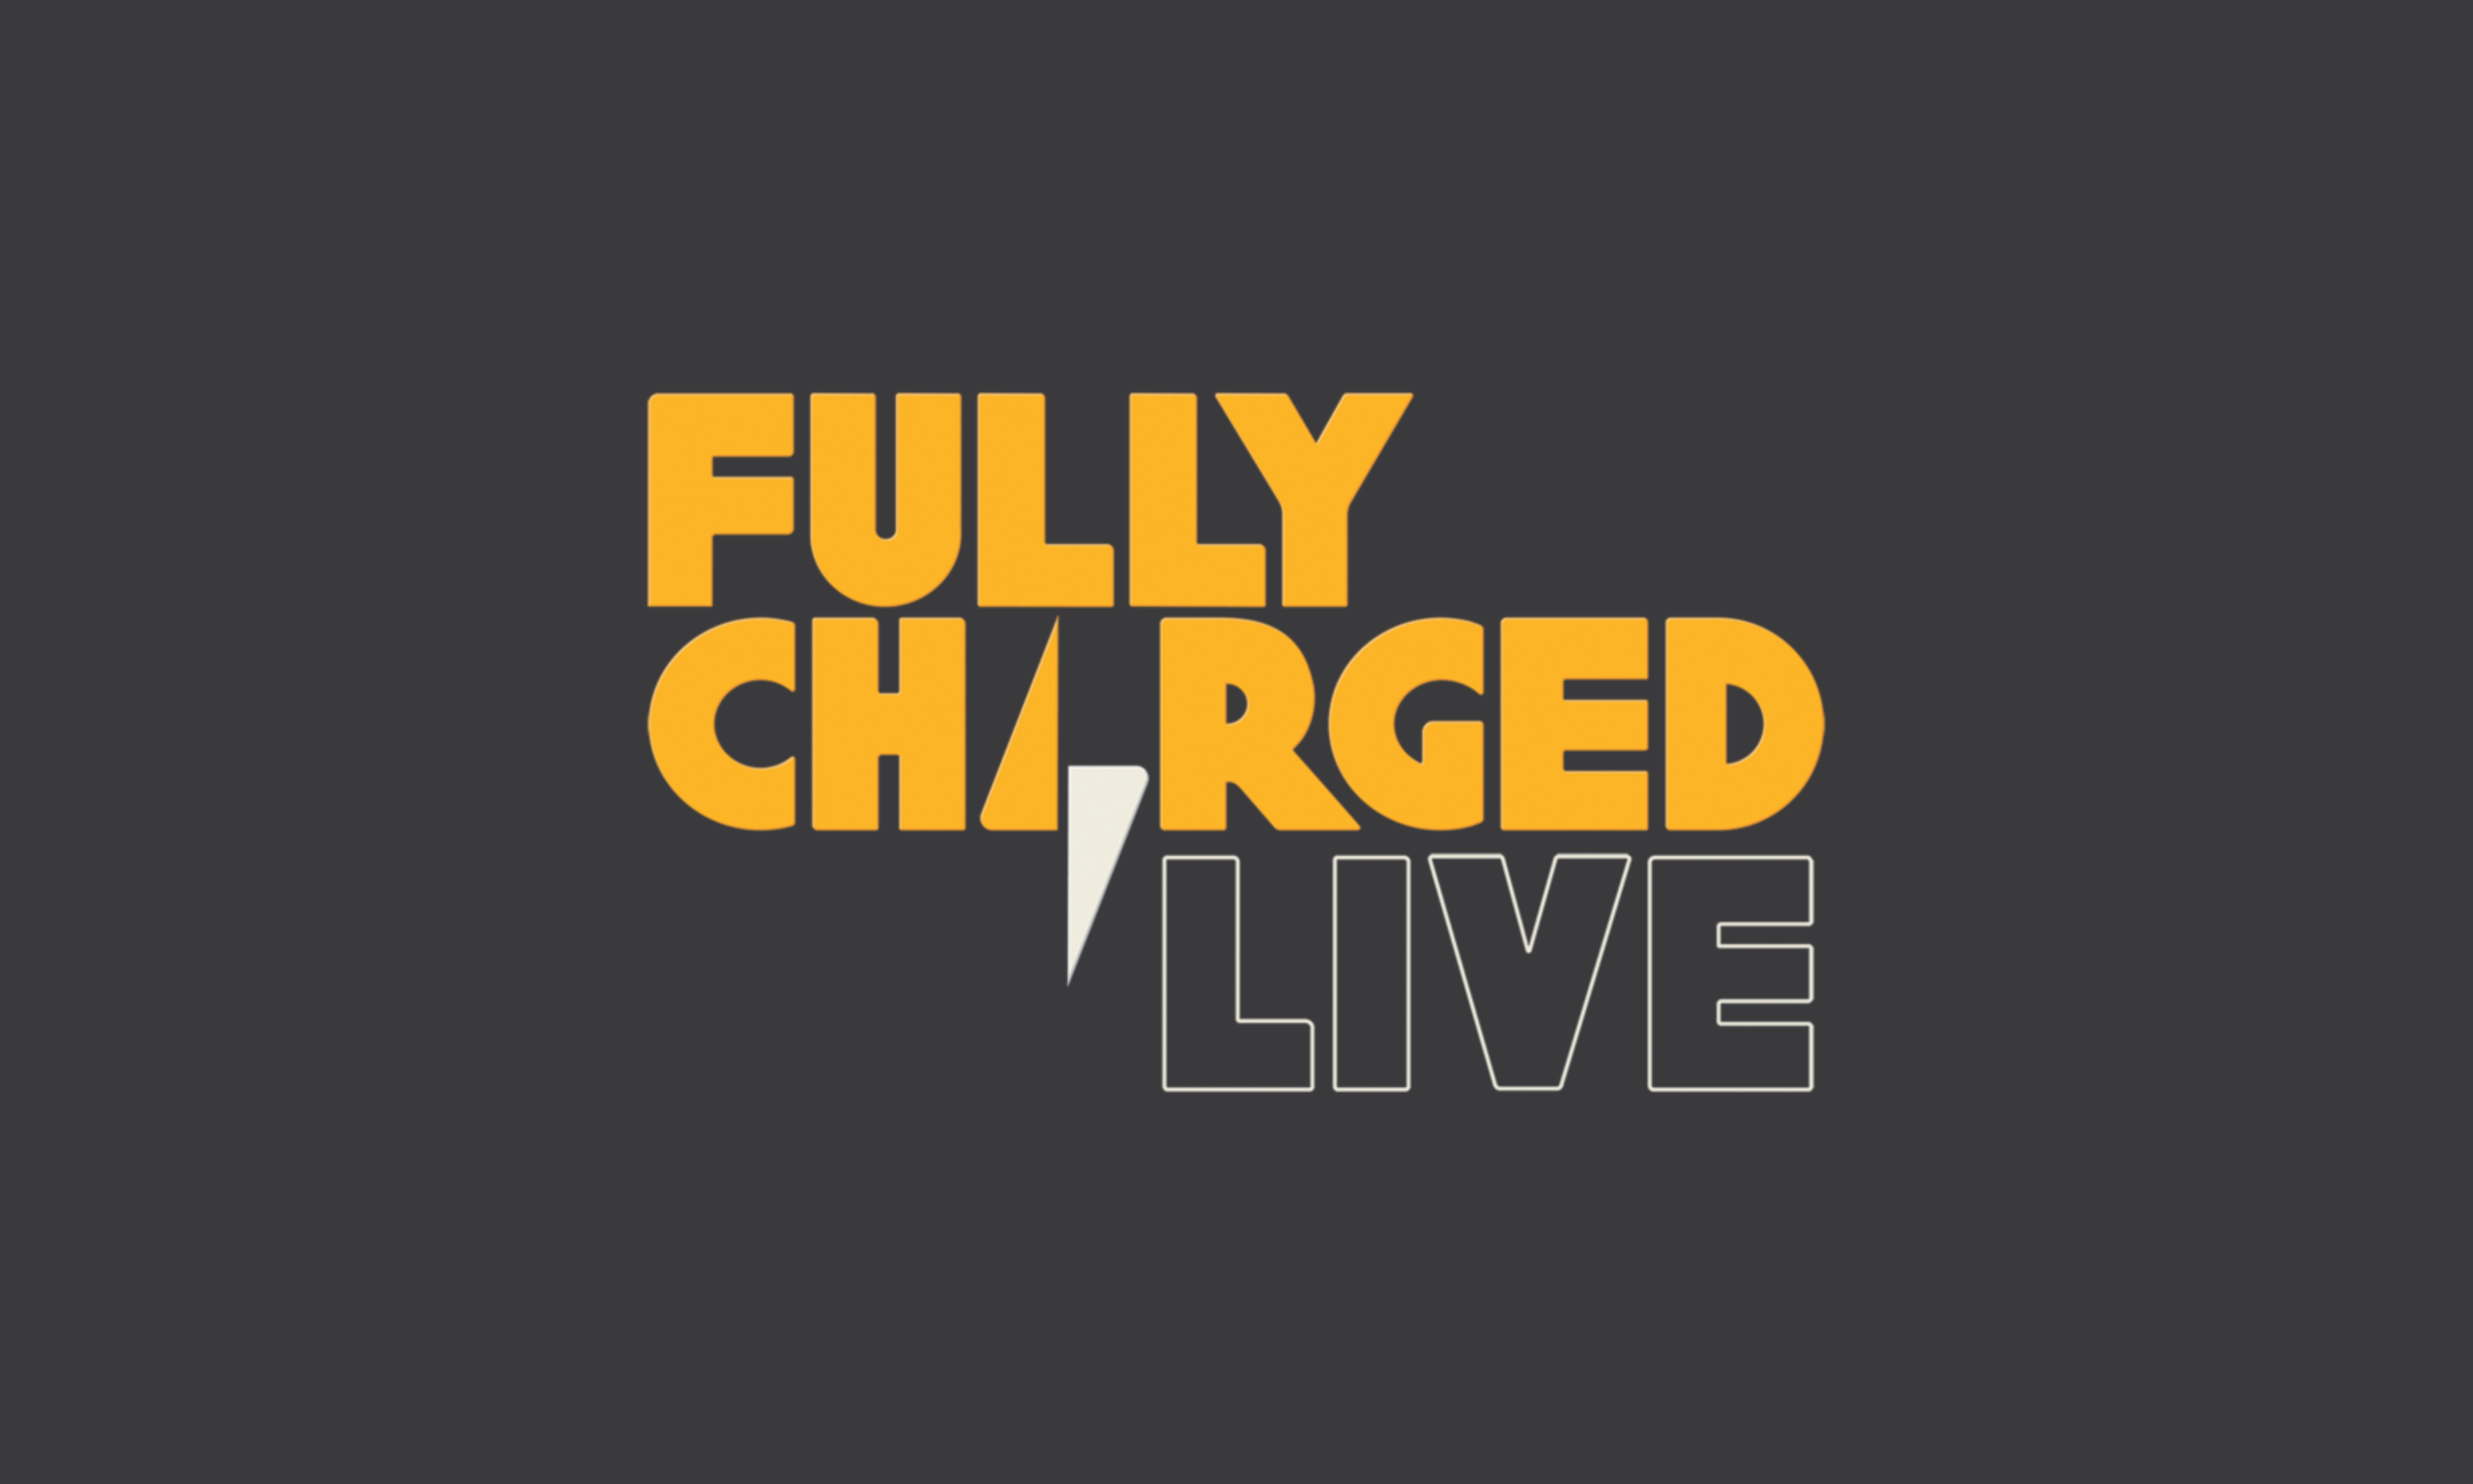 Fully Charged Live!